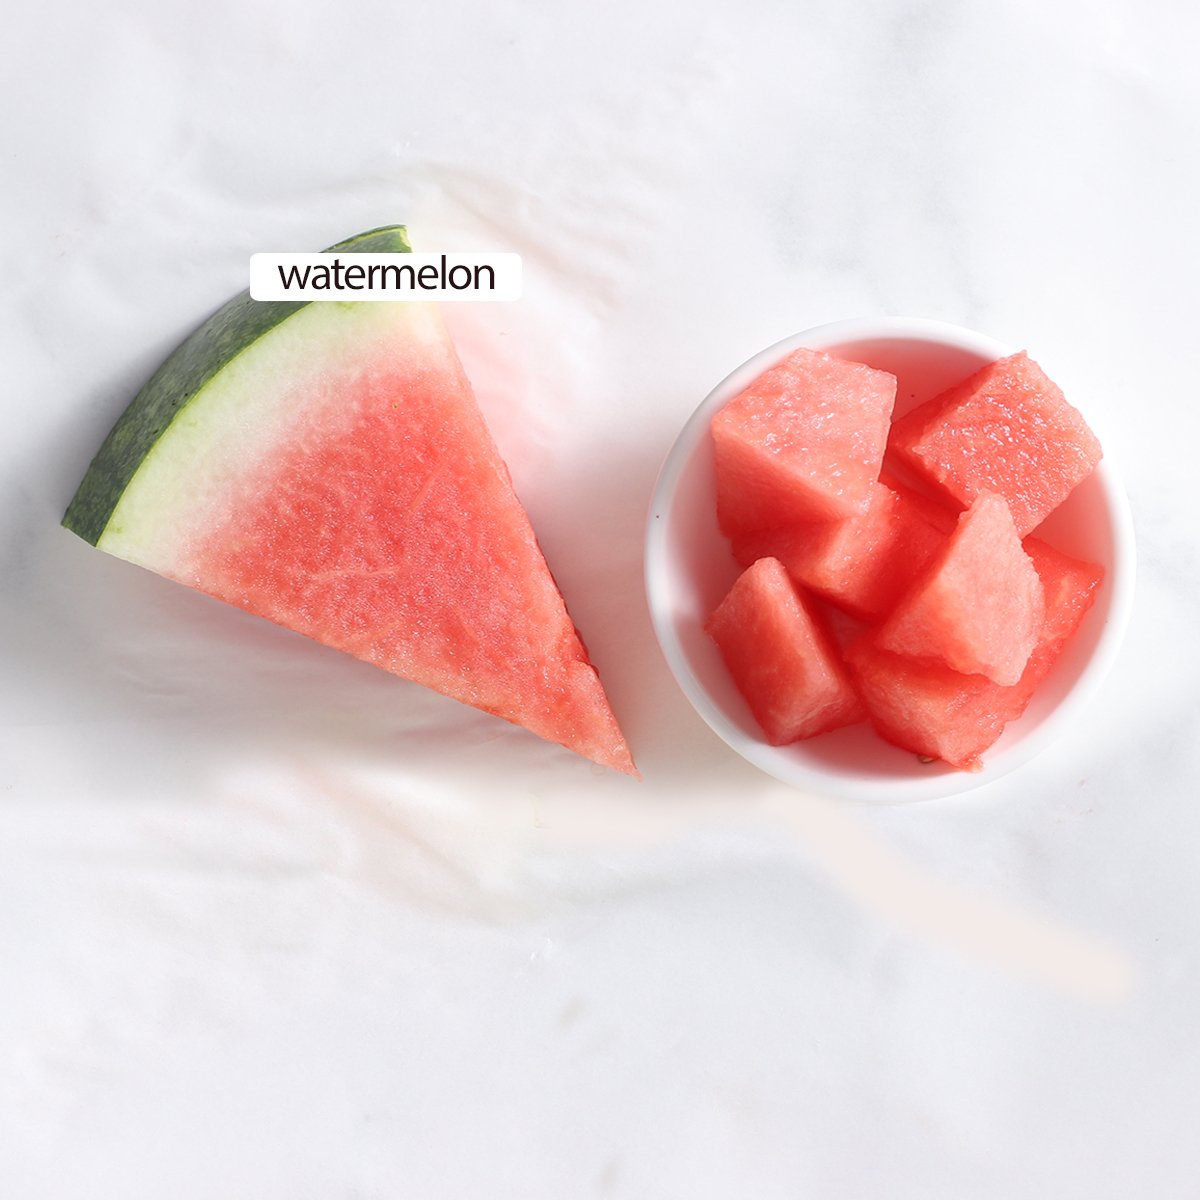 a wedge of watermelon and bricks.